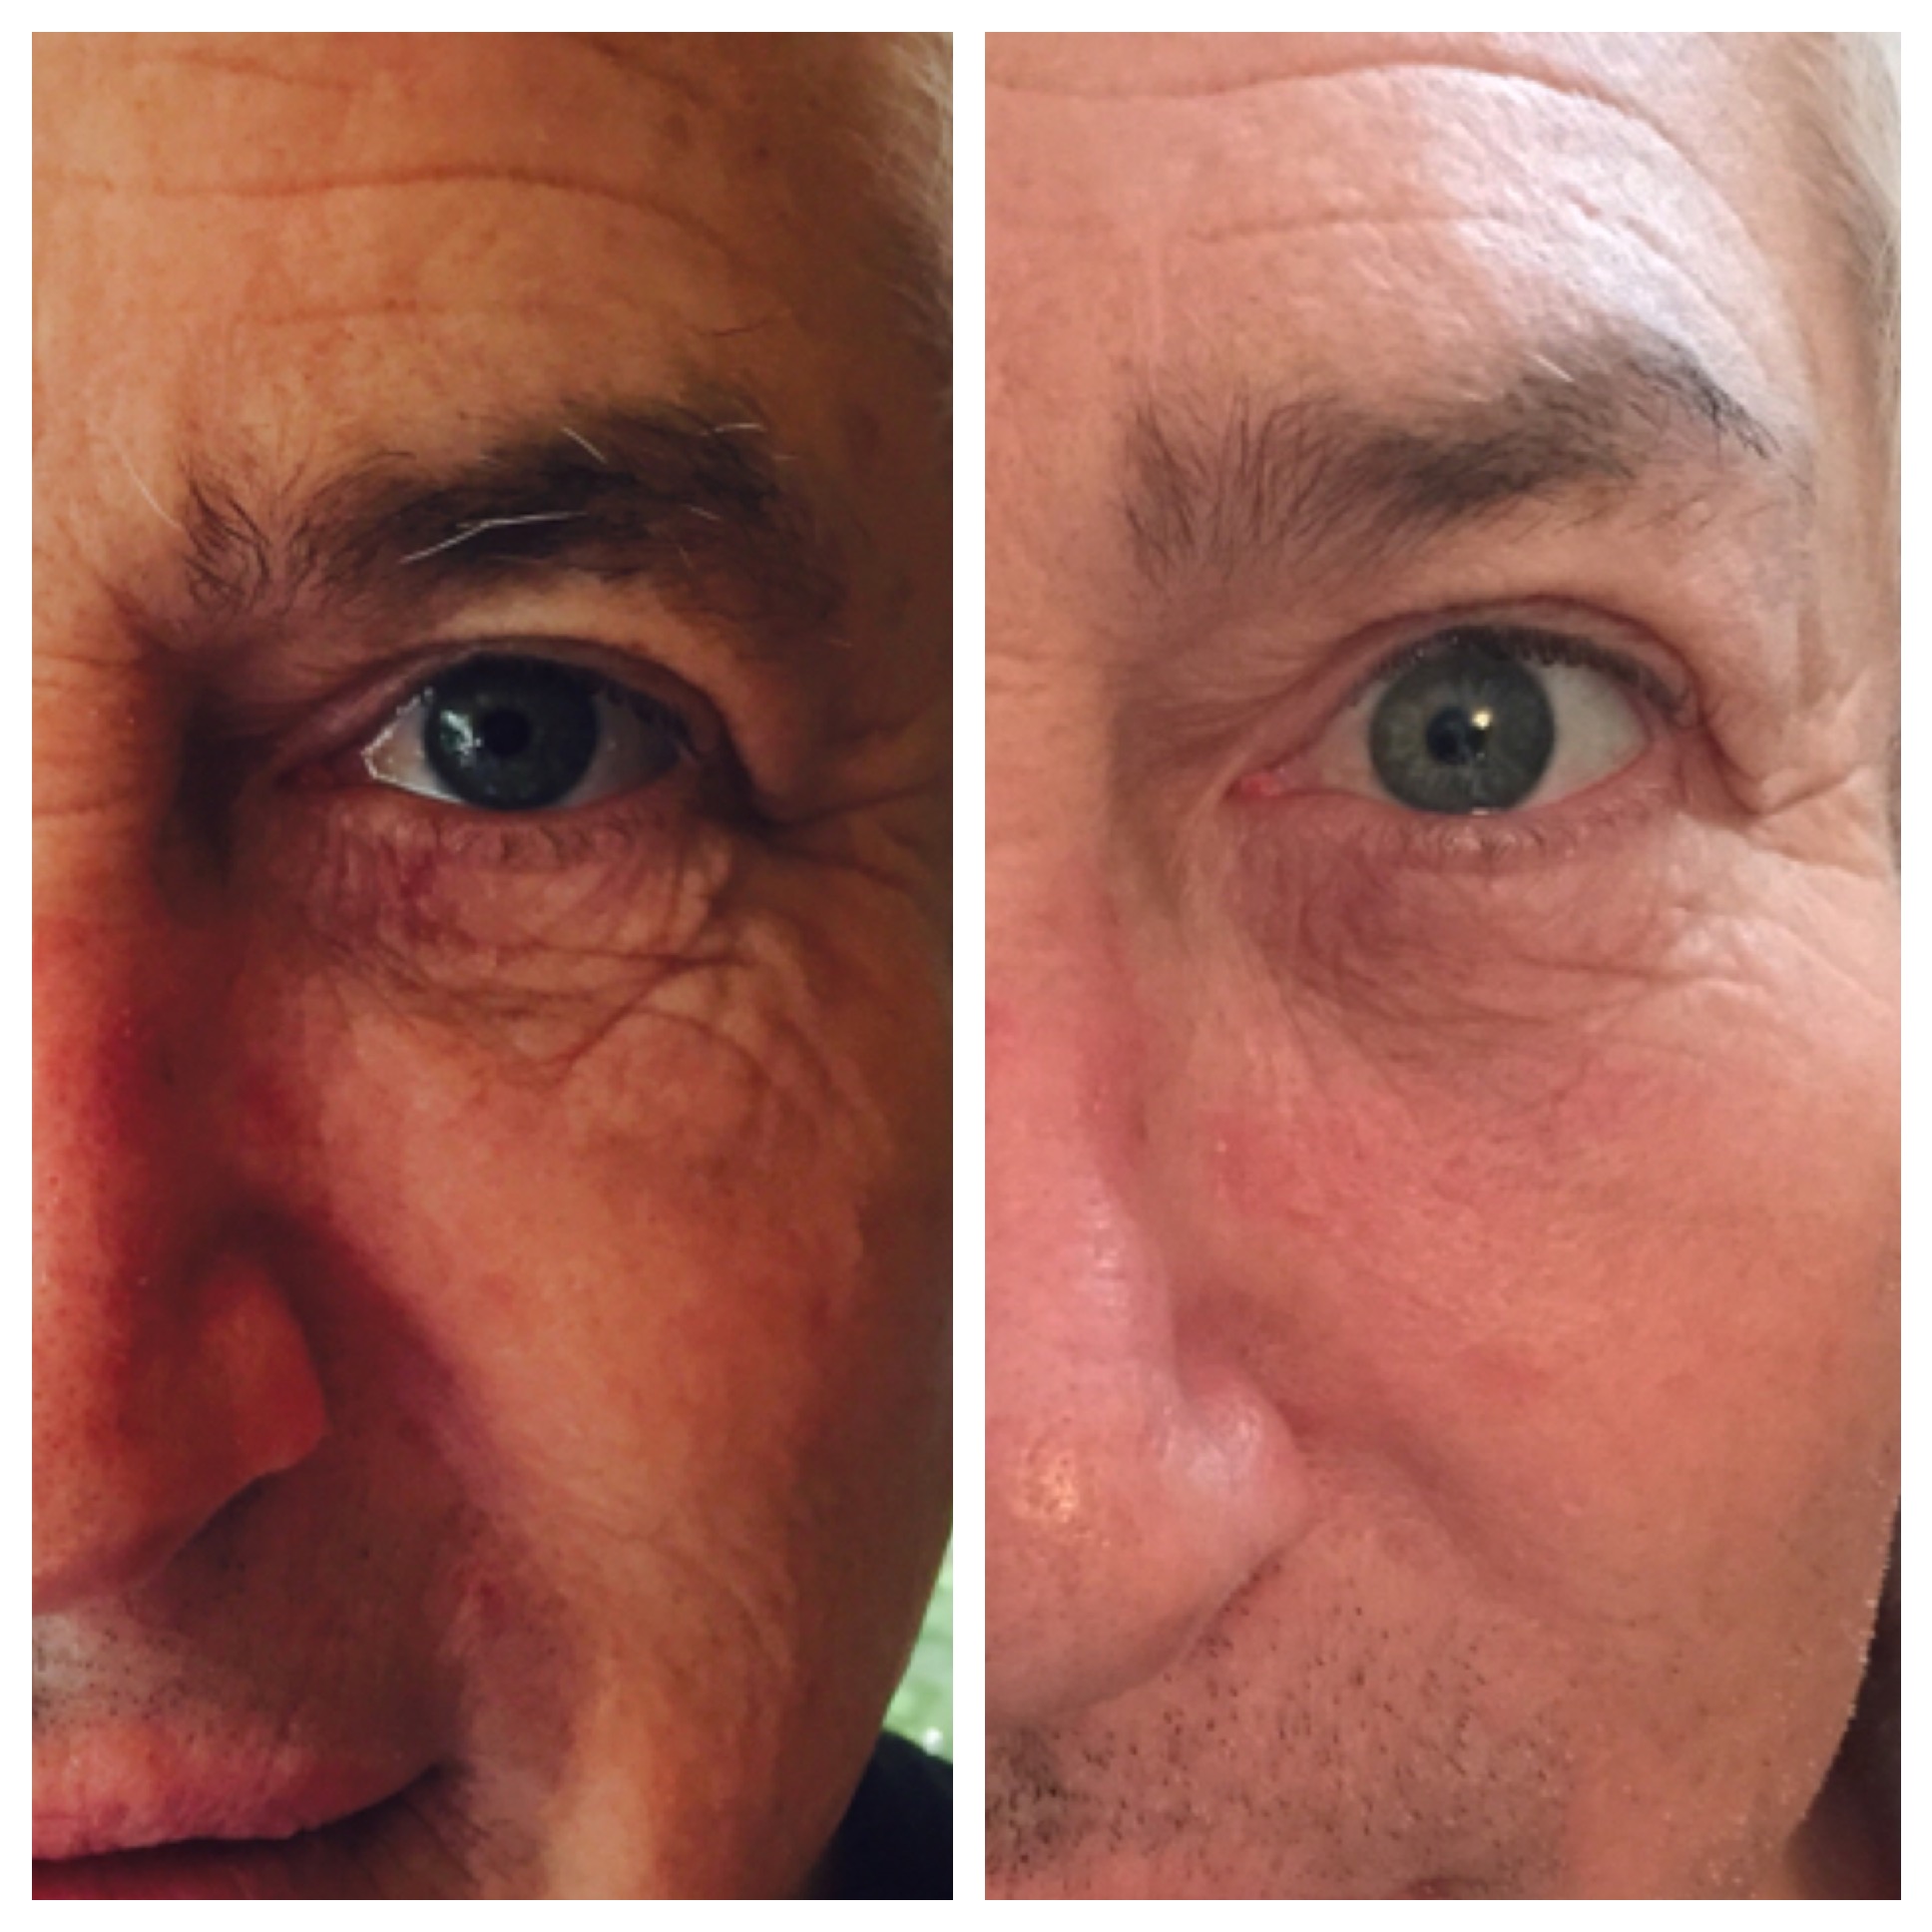   Tone/Texture improved and fine lines filled using Perfect Derma Peel (Intense Peel)  